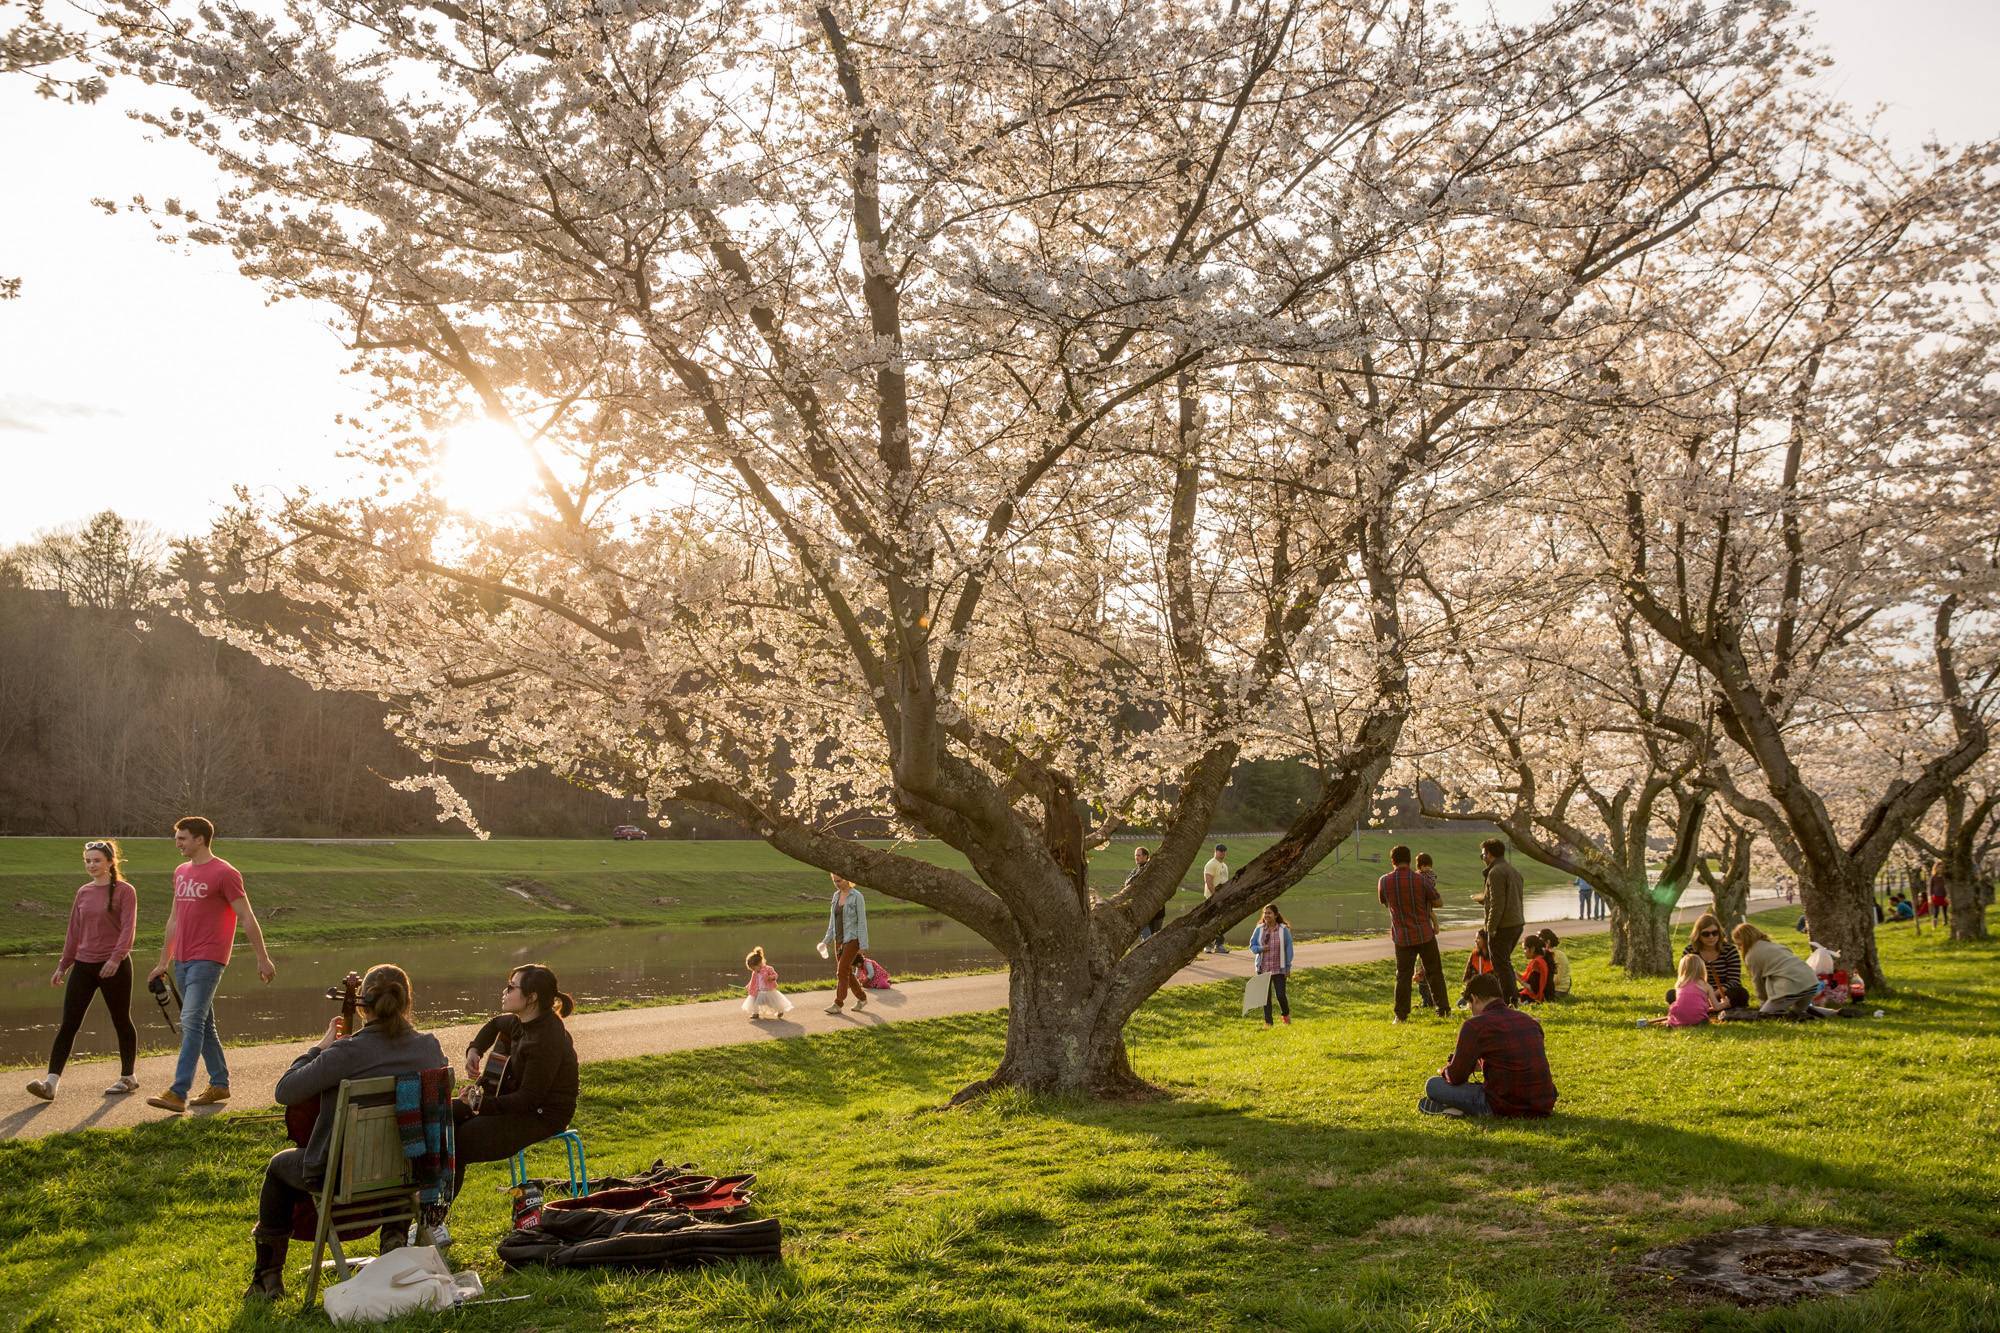 Ohio University’s Japanese cherry blossom trees, gifted to OHIO by its Chubu University partners, stand along the Hocking River in Athens, Ohio.